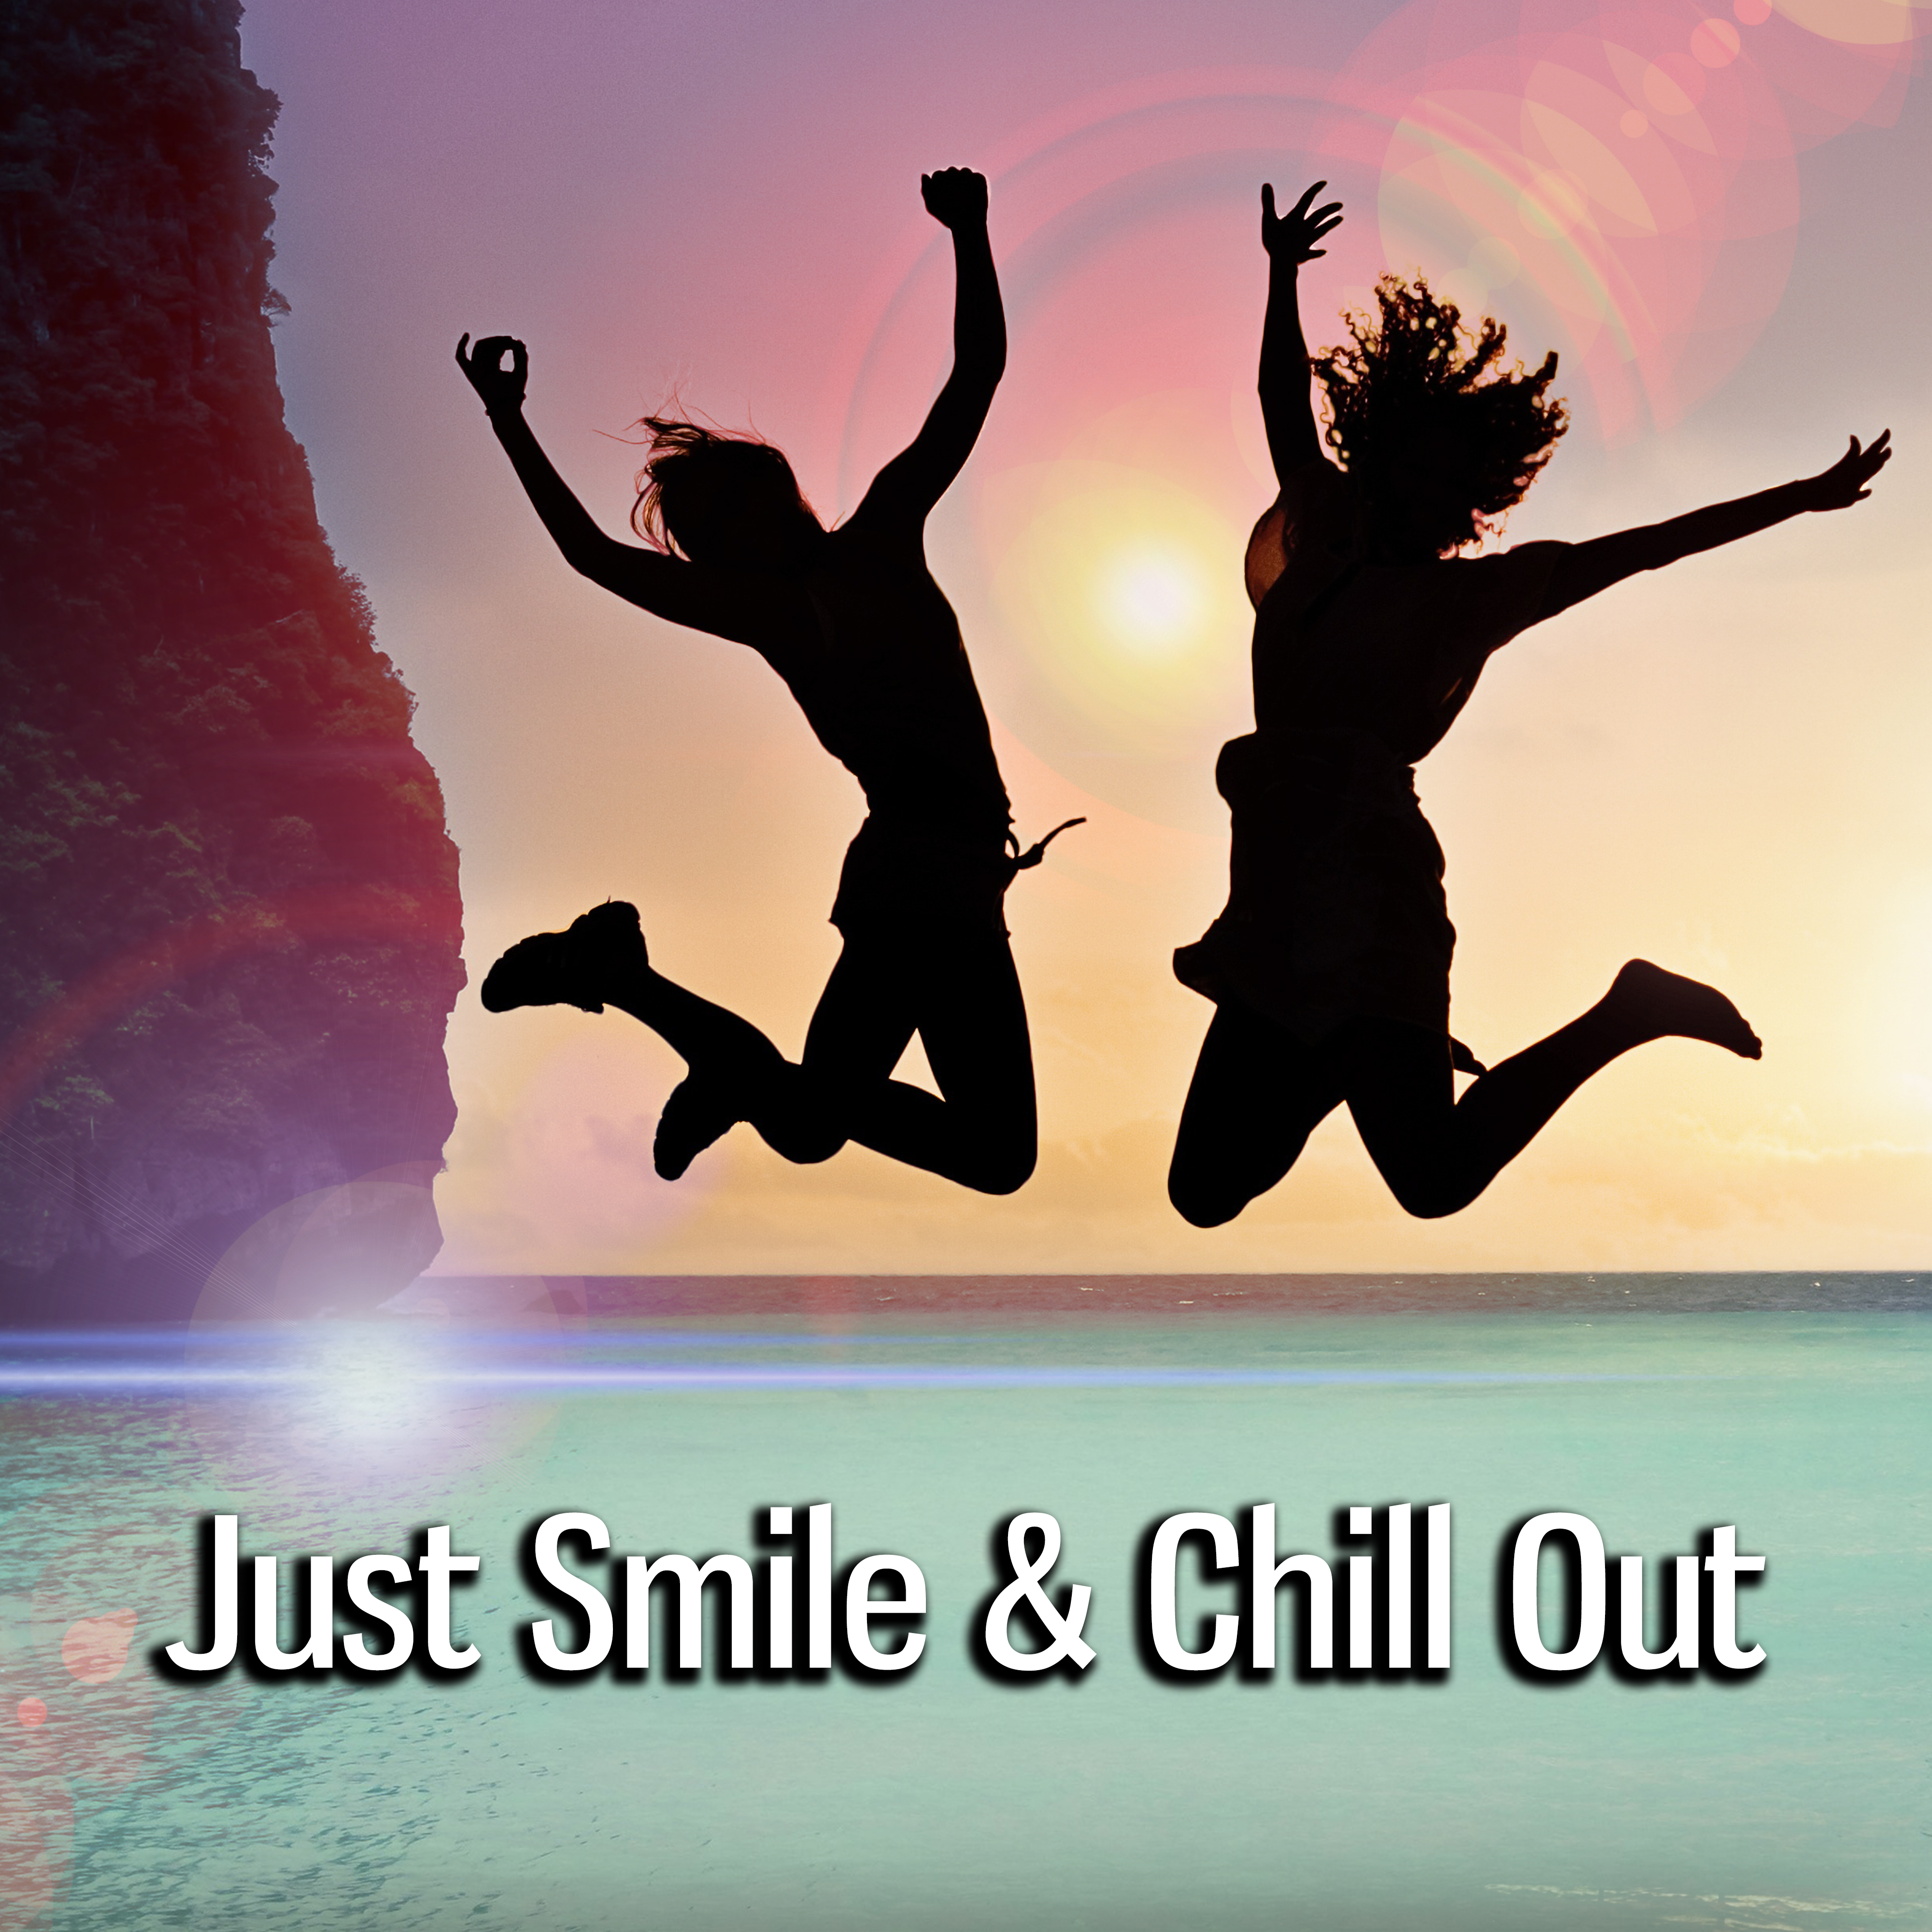 Just Smile & Chill Out - Time to Relax, Relaxation Music on Everyday, Positive Energy, Just Relax, Music for Summer & Rainy Days, Piano Relaxation Music